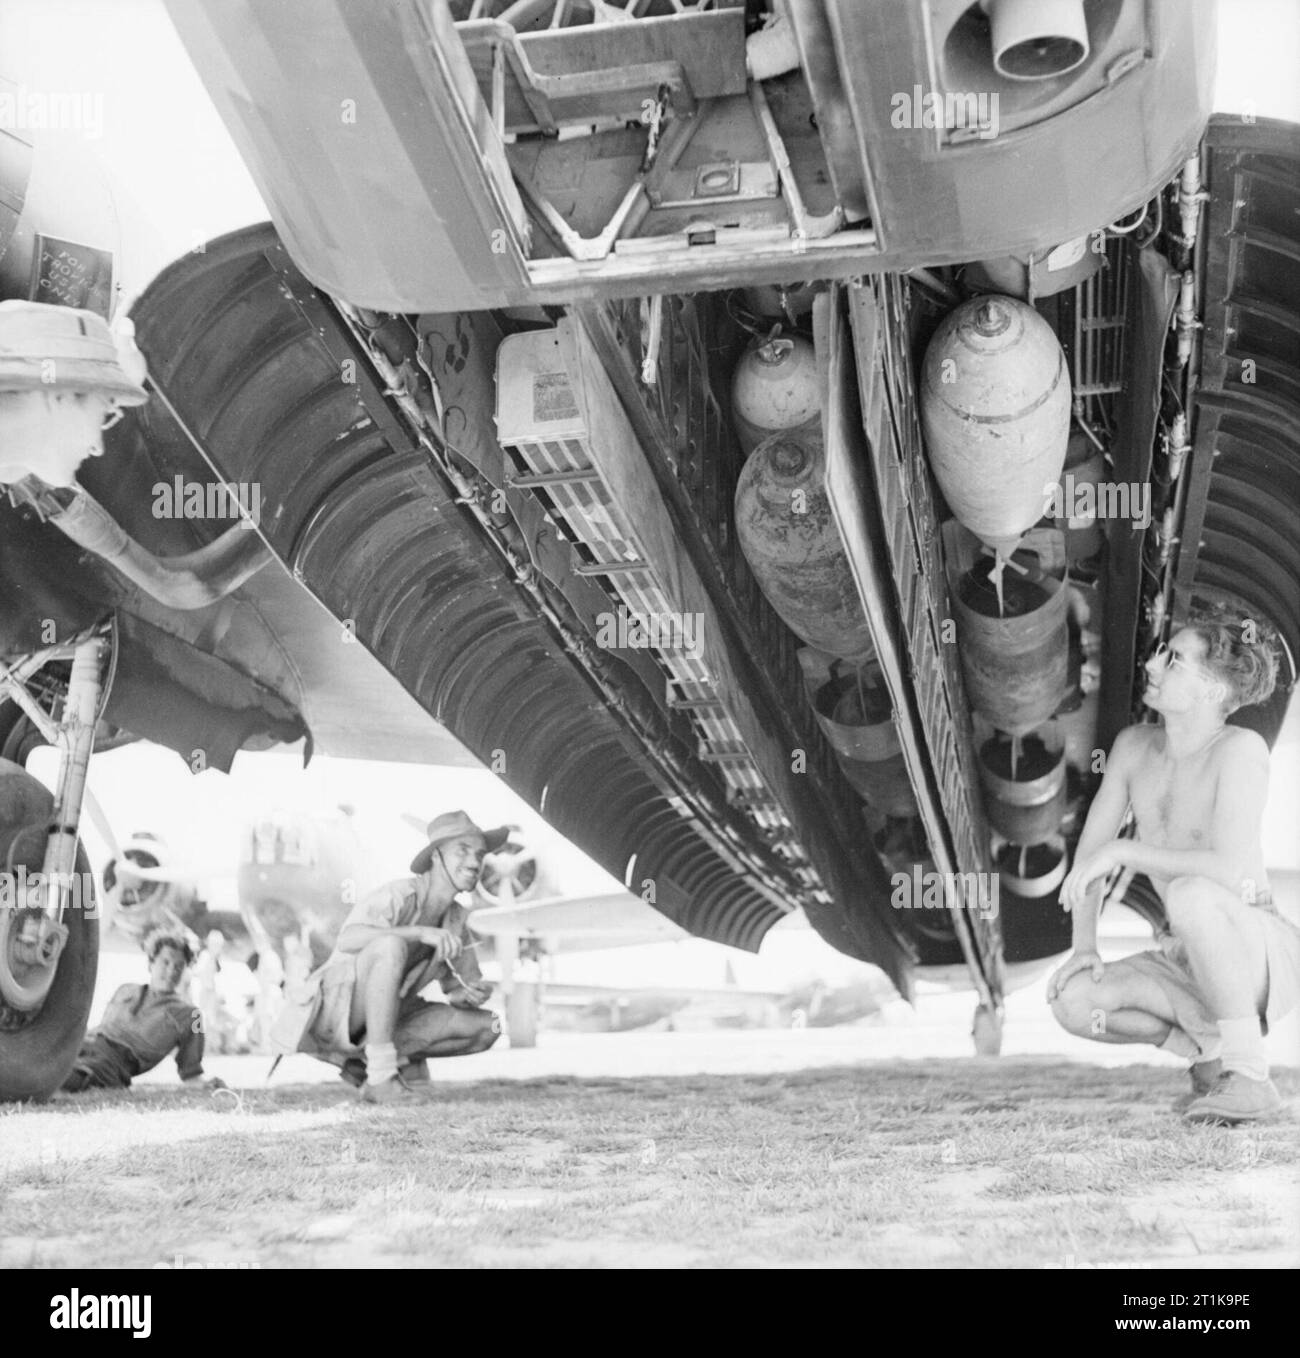 Royal Air Force Operations in the Far East, 1941-1945. Leading Aircraftman W T Messenger of Barry, South Wales and Aircraftman R J Frost of Brynmill, Swansea, check over the a load of 1,000-lb HE and Small Bomb Containers (SBC) filled with 4lb incendiaries in the bomb bay of a Vickers Wellington Mark X of No. 99 Squadron RAF at Jessore, India, prior to a sortie over Burma. Stock Photo